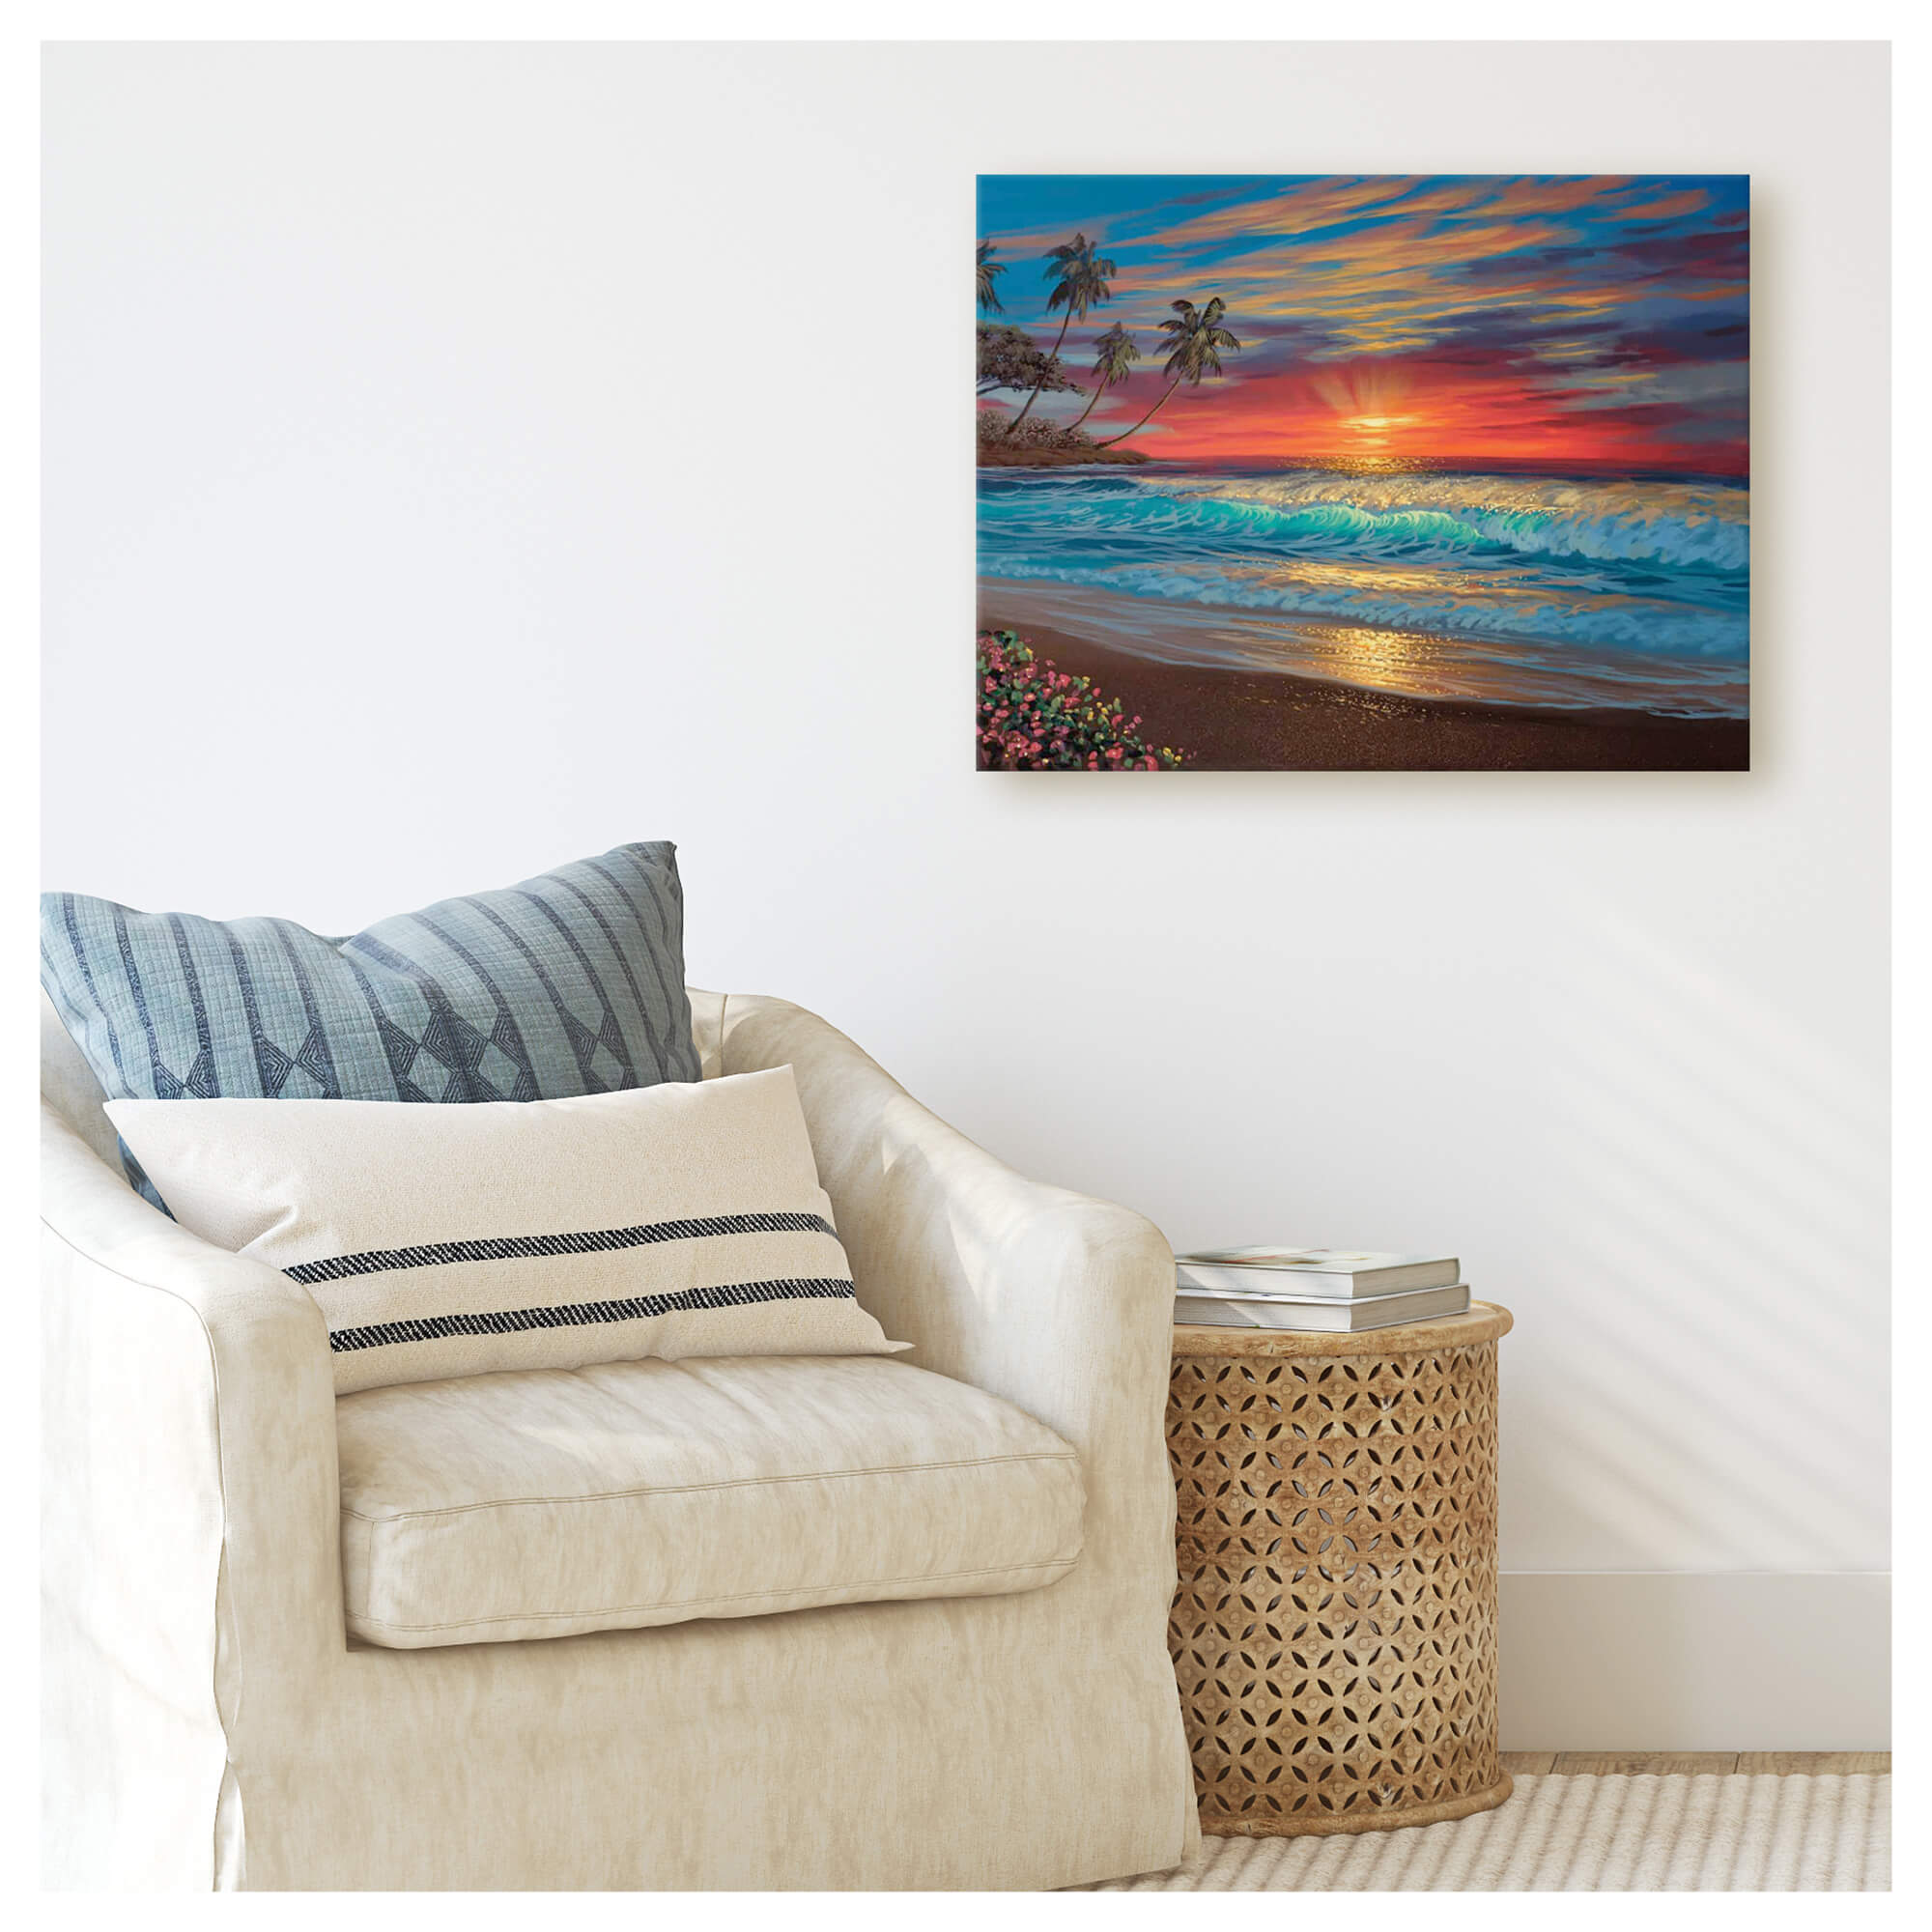 Original painting depicting a brilliant seascape sunrise with waves by Hawaii artist Walfrido Garcia